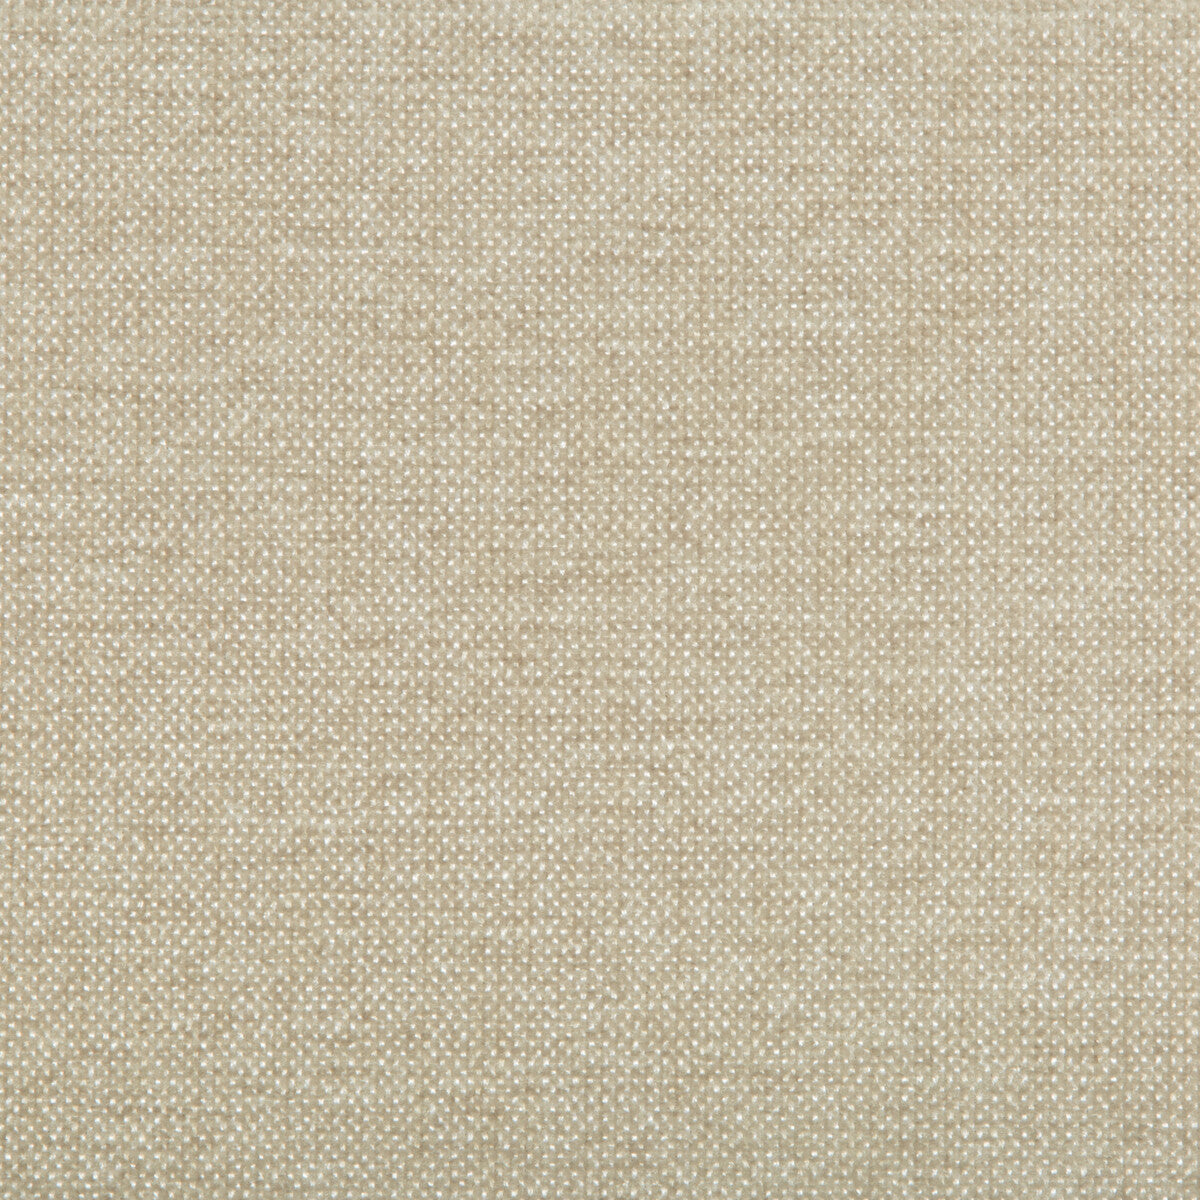 Kravet Smart fabric in 35393-116 color - pattern 35393.116.0 - by Kravet Smart in the Performance Crypton Home collection